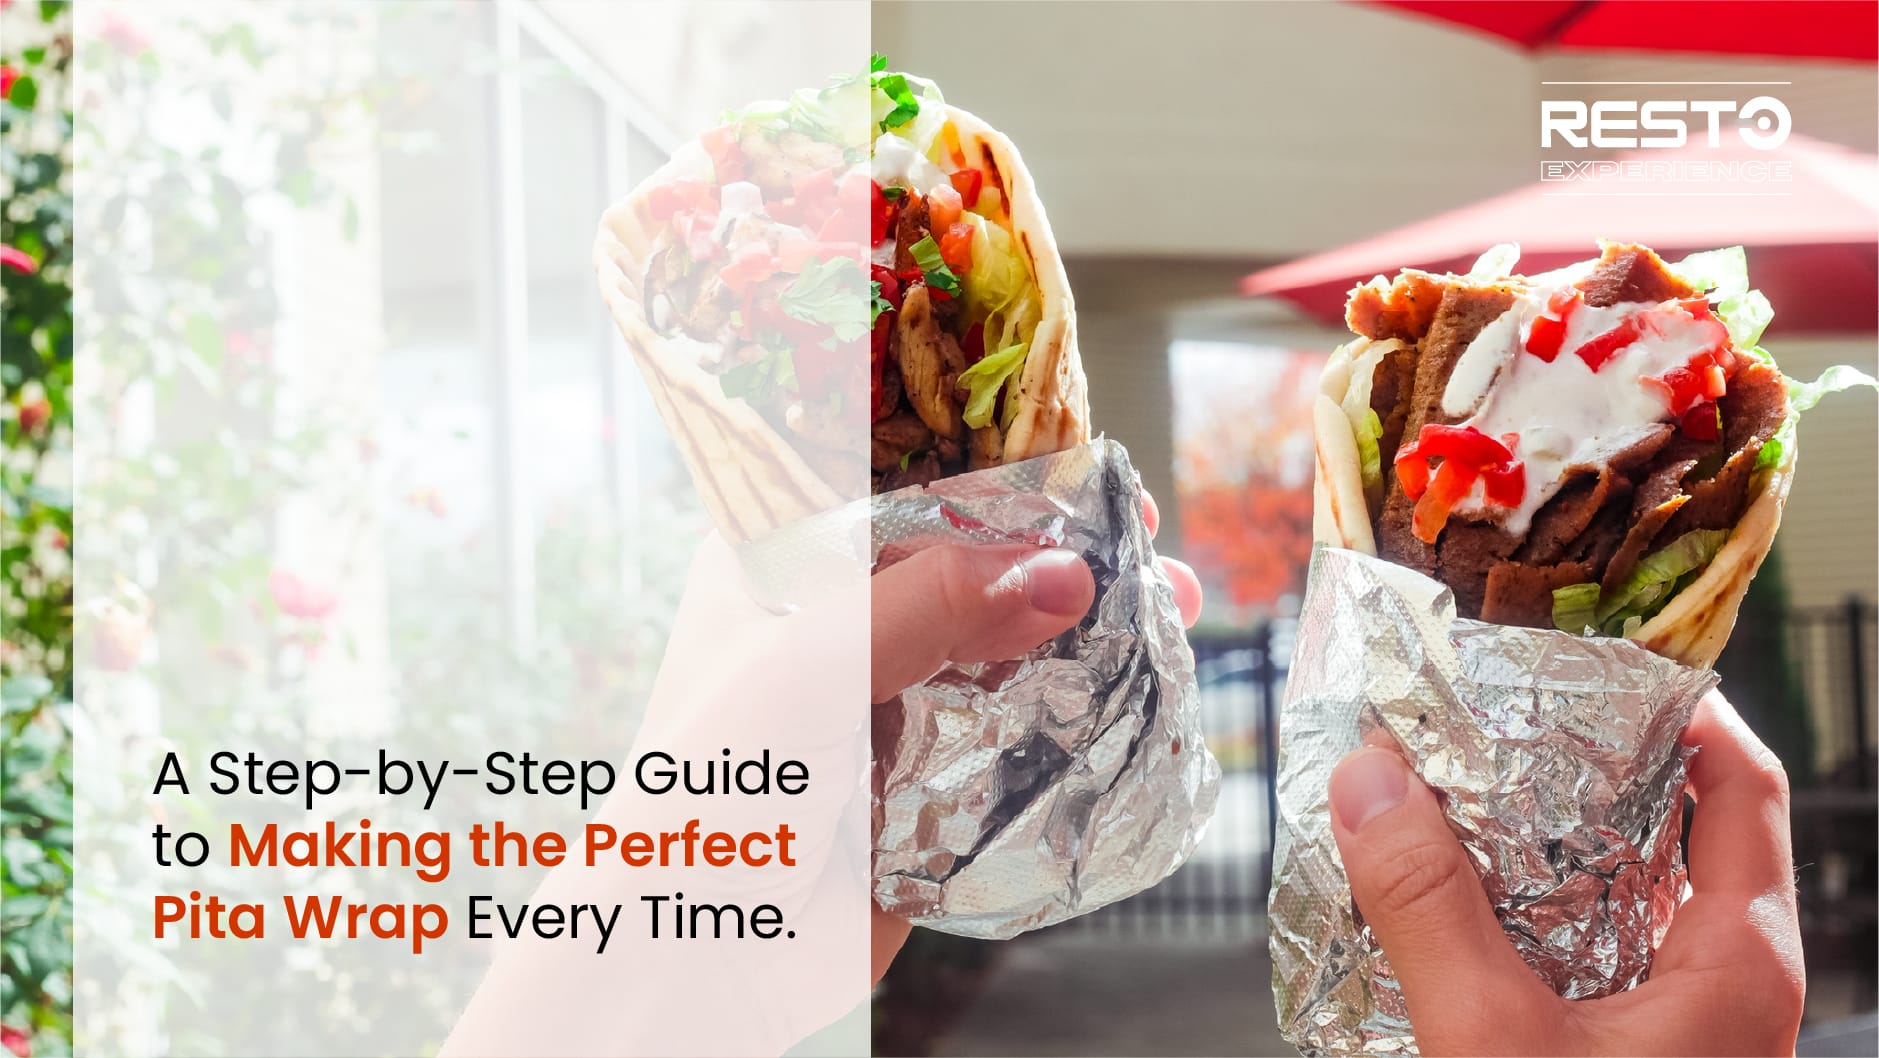 Perfect Pita Wrap: A Step-by-Step Guide to Making the Perfect Pita Wrap Every Time